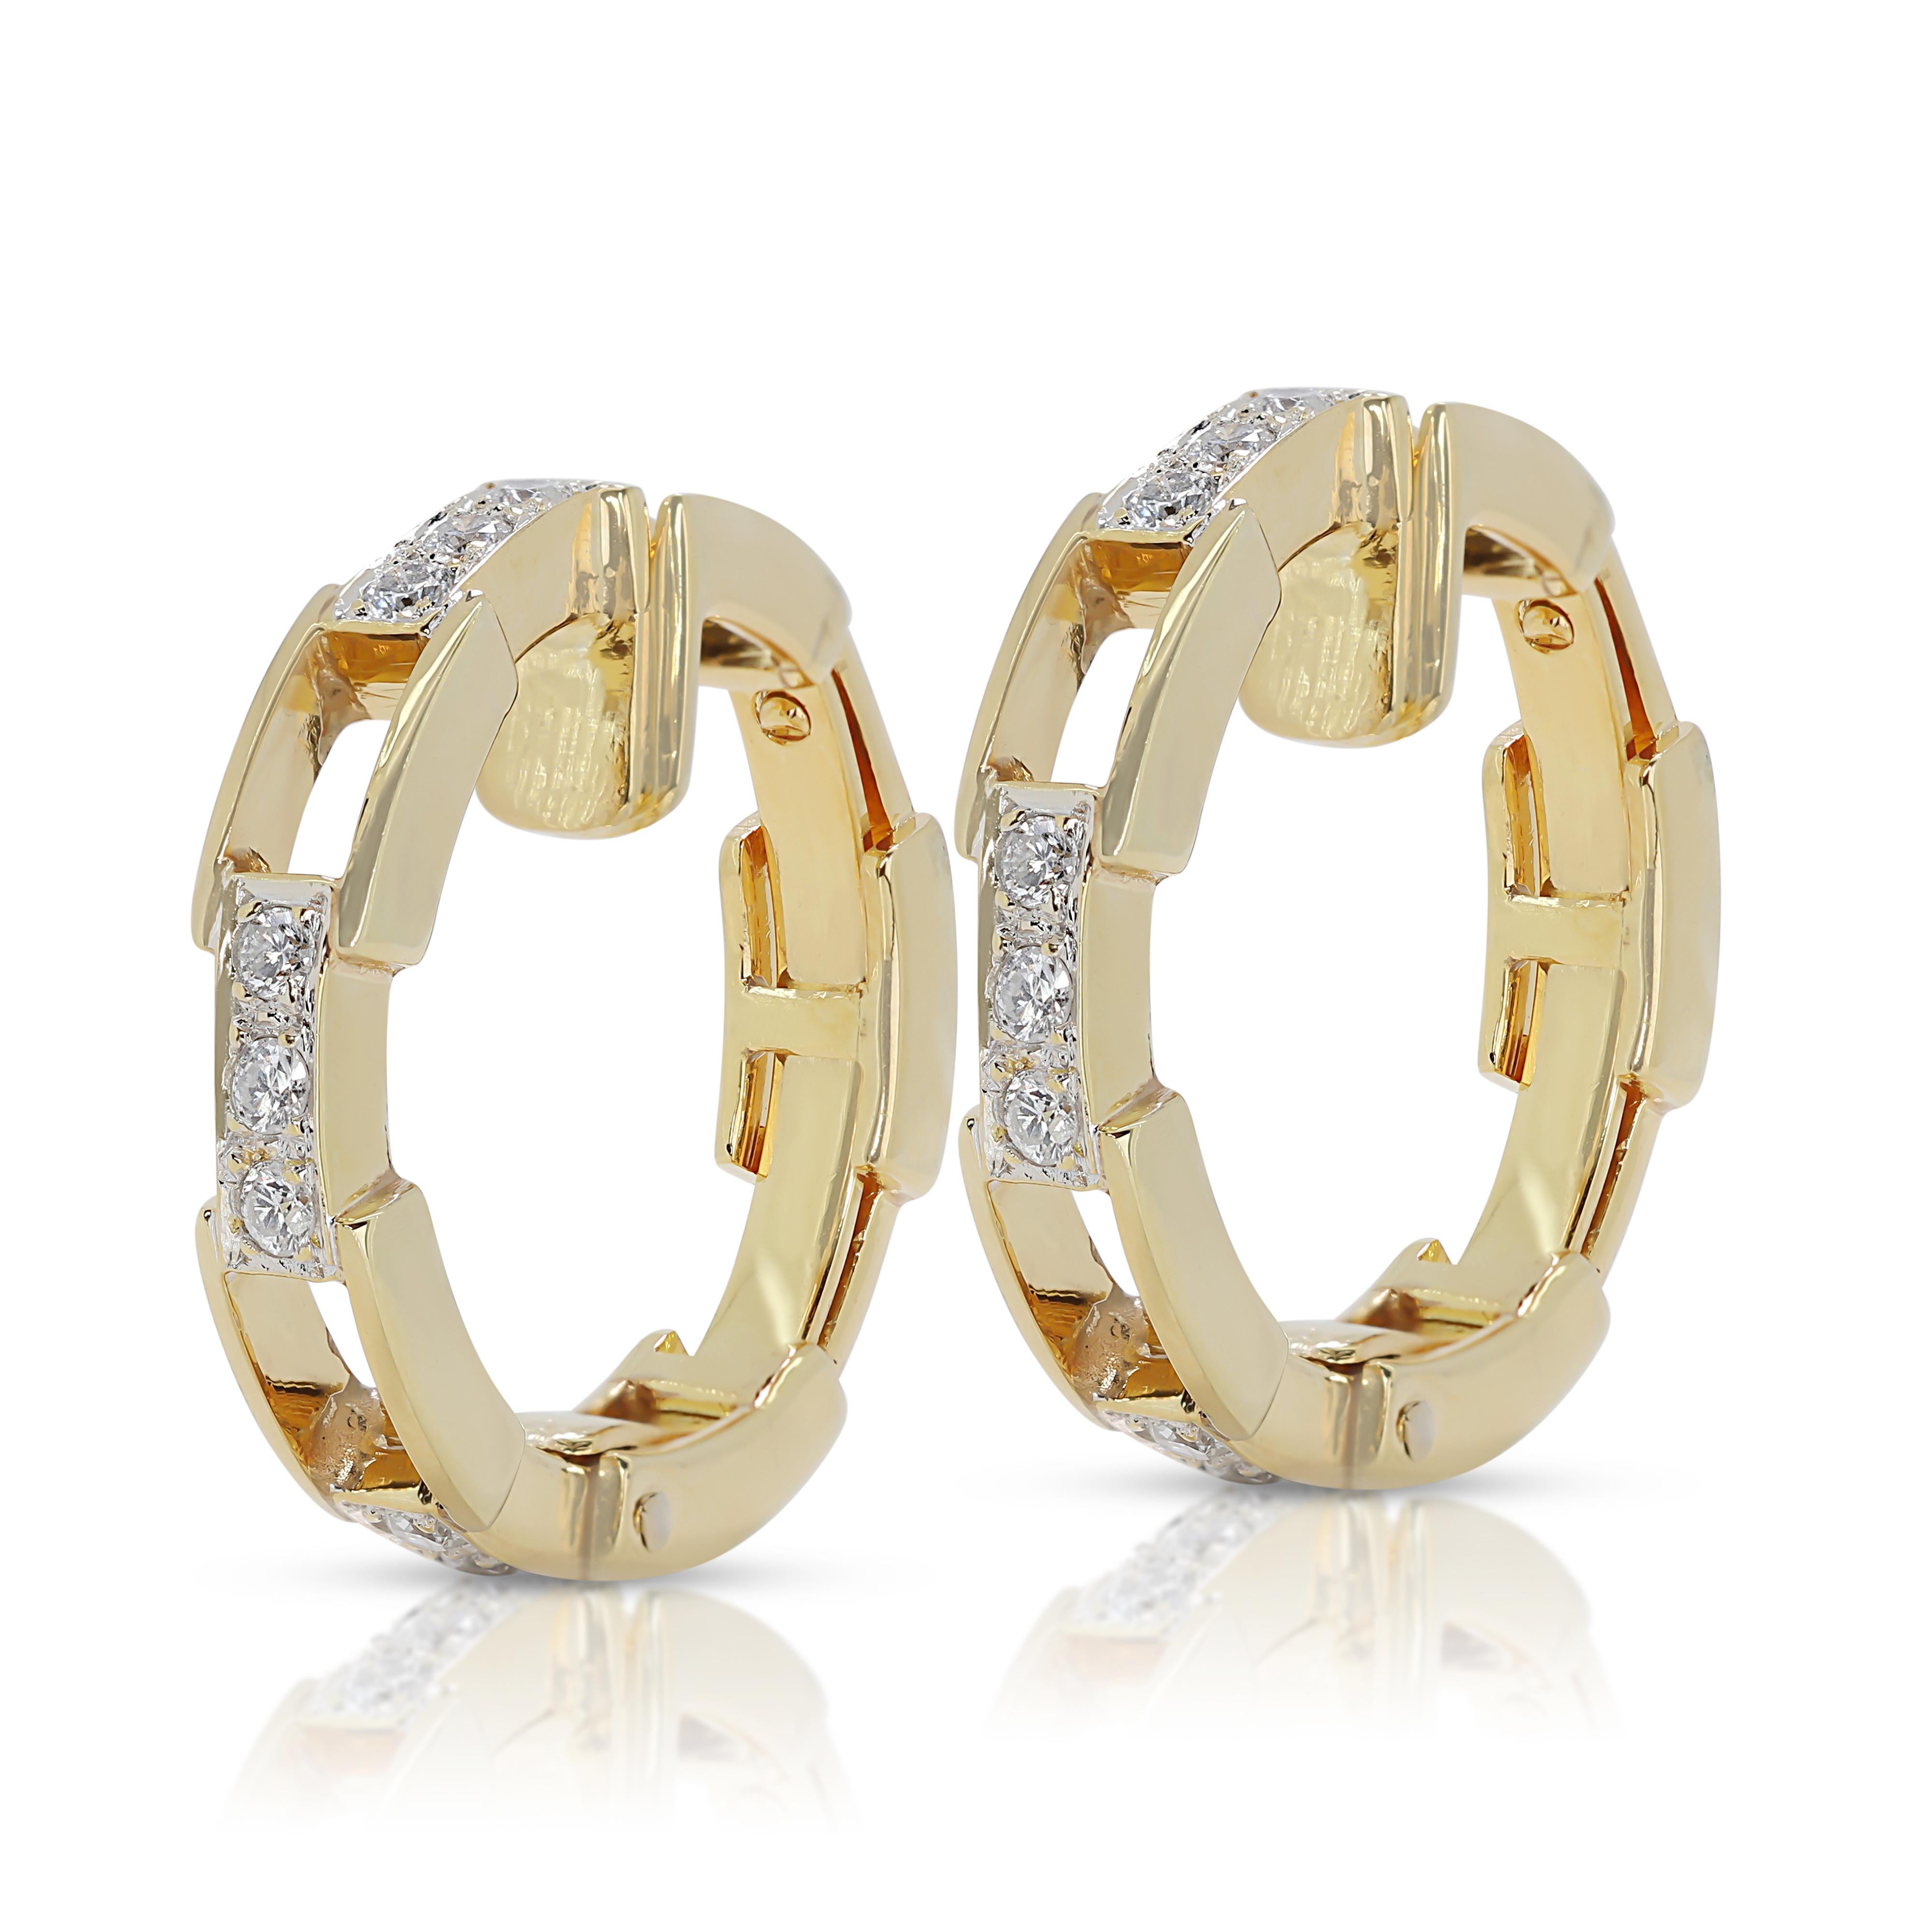 Round Cut Captivating 0.30ct Diamonds Earrings in 14K Yellow Gold For Sale